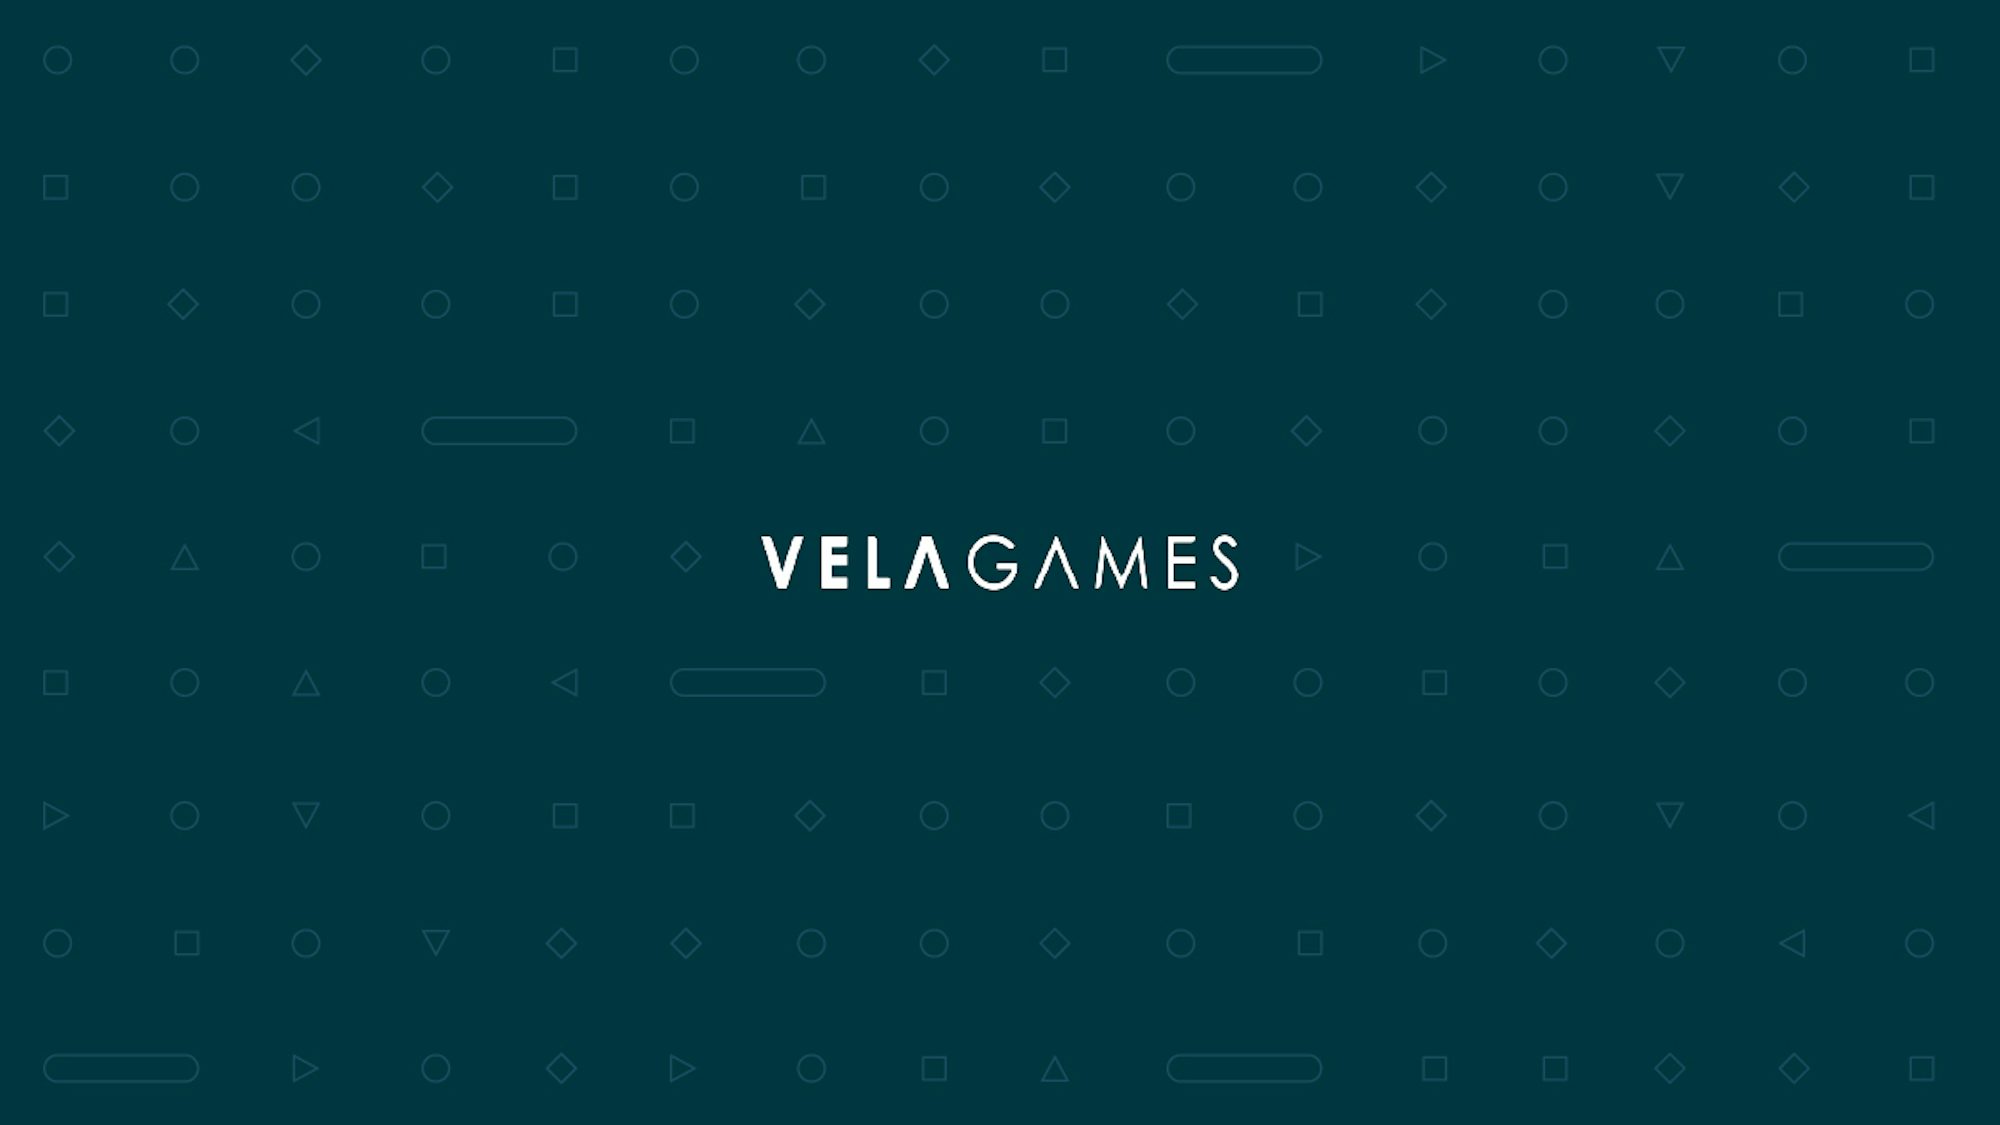 The Vela games logo floats on a field of gaming icons.